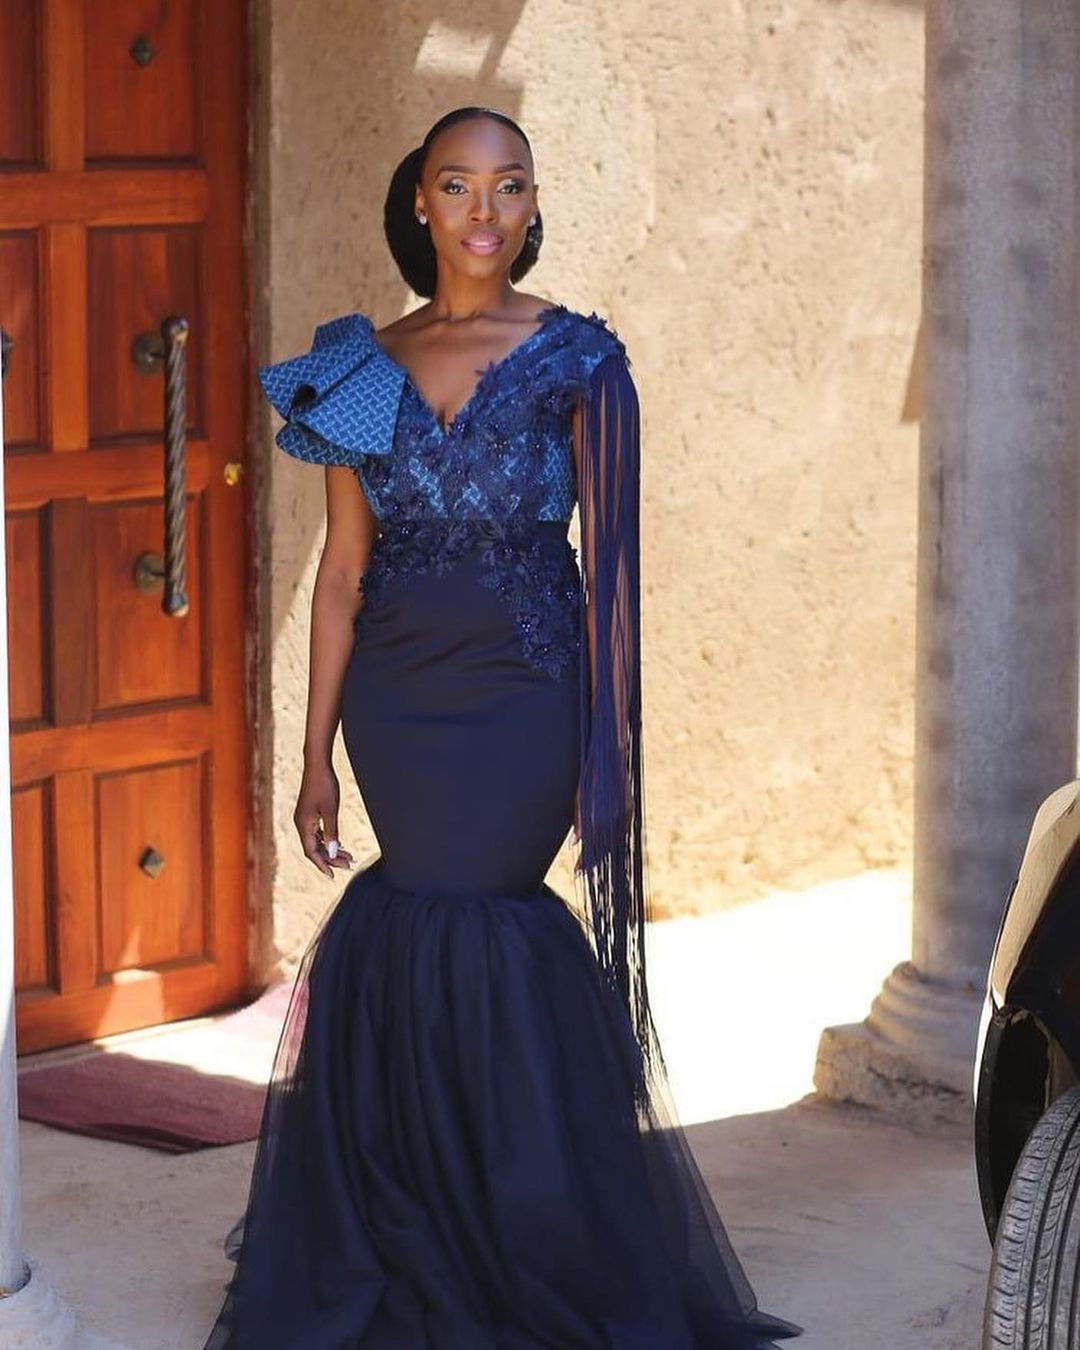 TOP 10 TSWANA WEDDING TRADITIONAL DRESSES FOR AFRICAN WOMEN 1